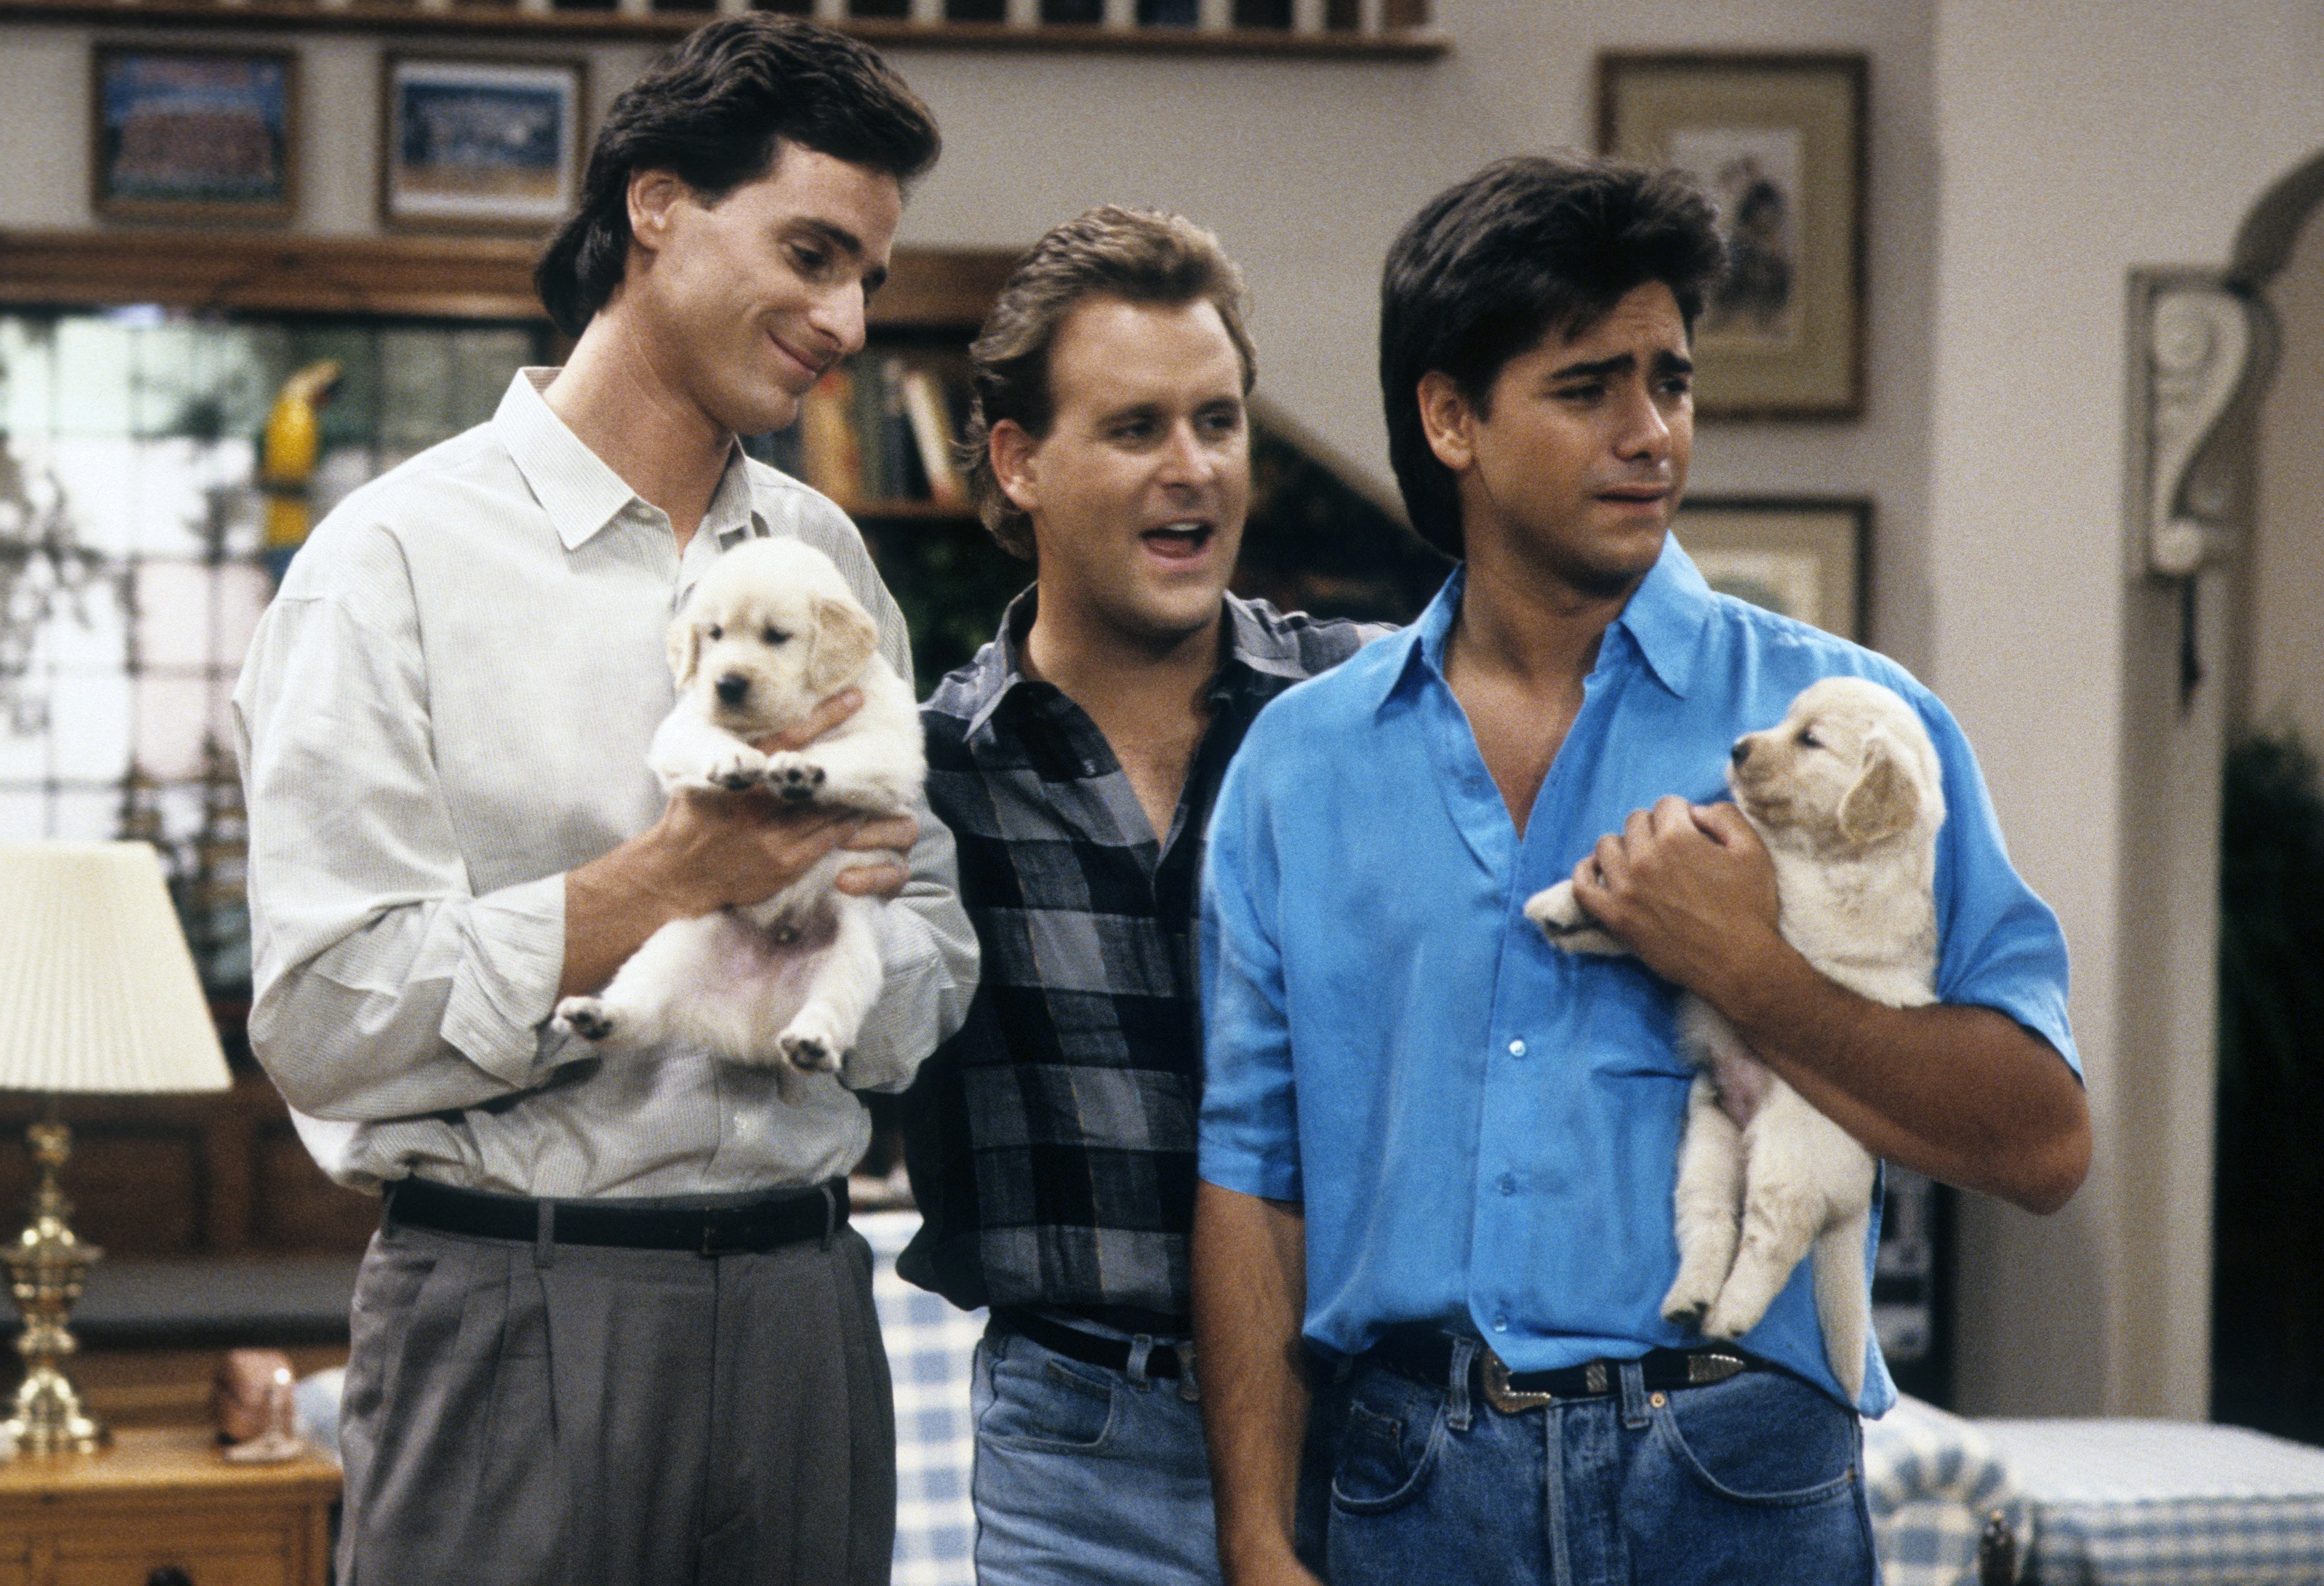 'Full House' episode titled 'And They Call It Puppy Love'